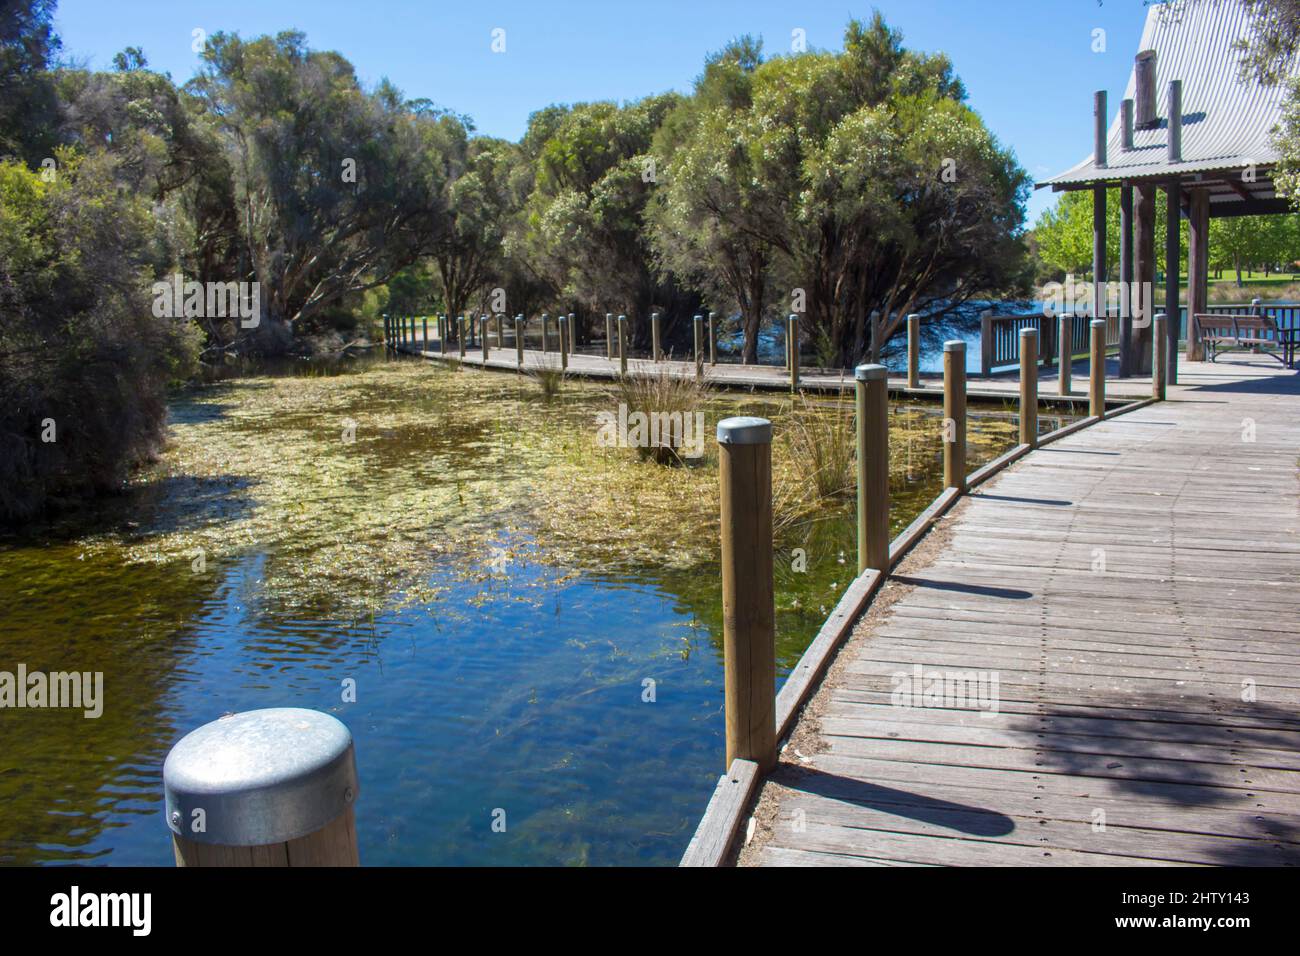 Scenic view of the boardwalk at Dalyellup, Western Australia on a cloudy late spring afternoon surrounded by water birds and paperbark melaleuca trees. Stock Photo